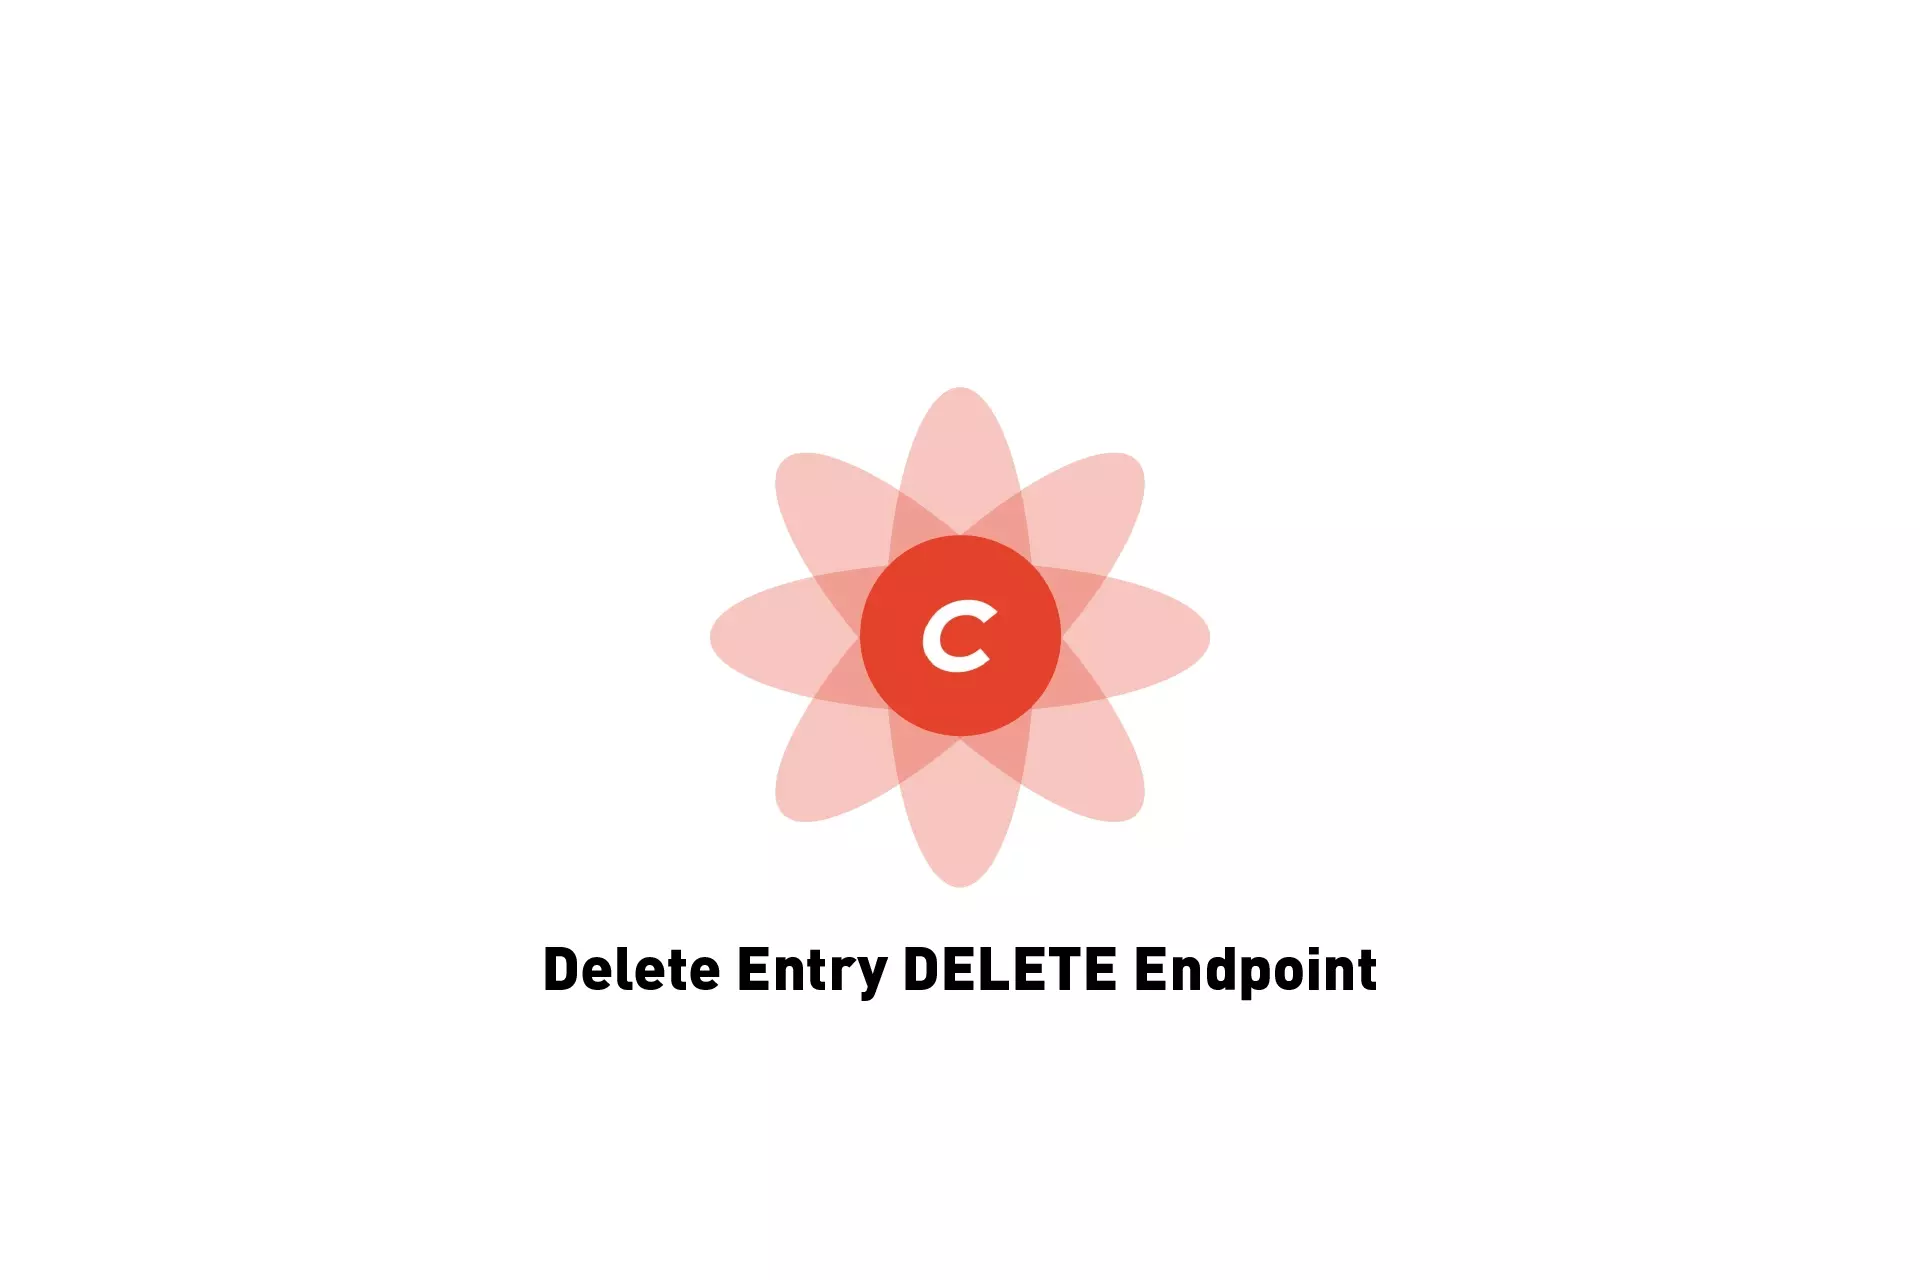 A flower that represents Craft CMS, beneath it sits the text "Delete Entry DELETE endpoint."